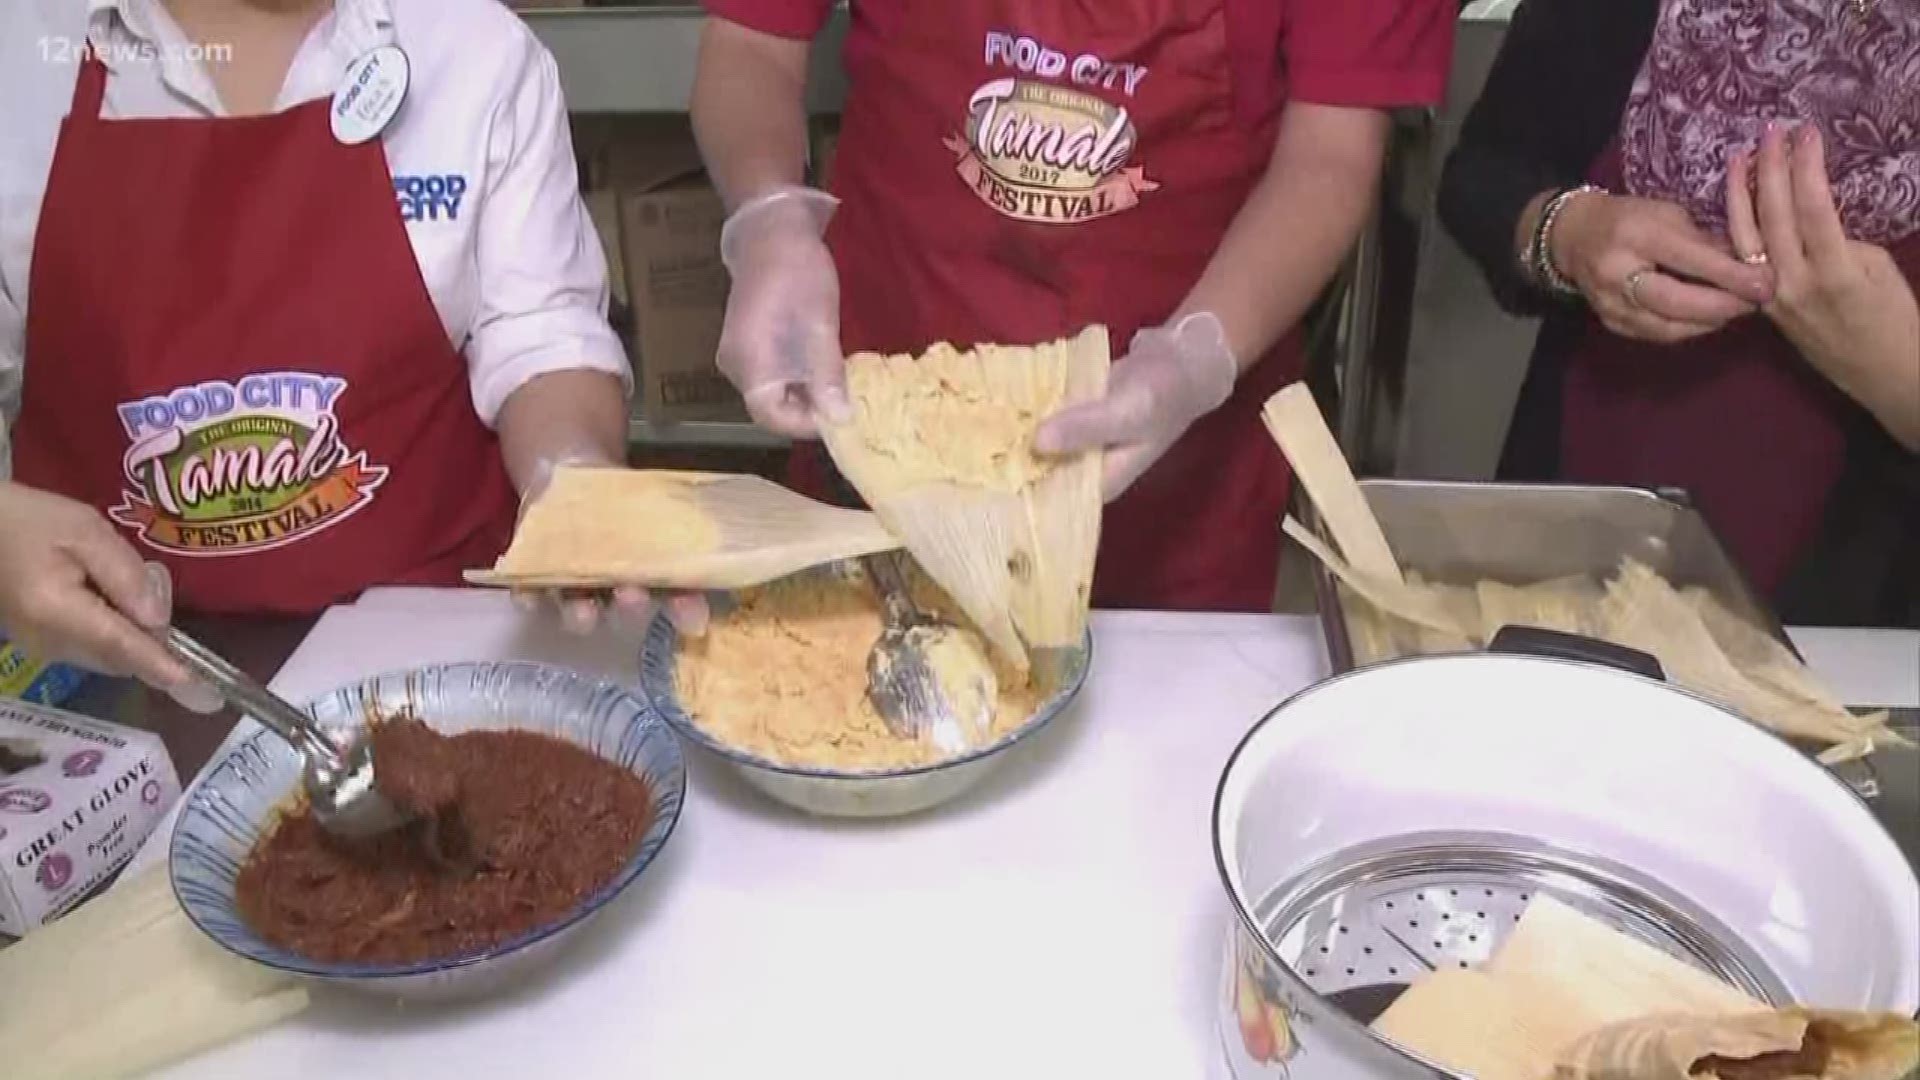 Tamales are taking over downtown Phoenix on Dec. 8 - 9.